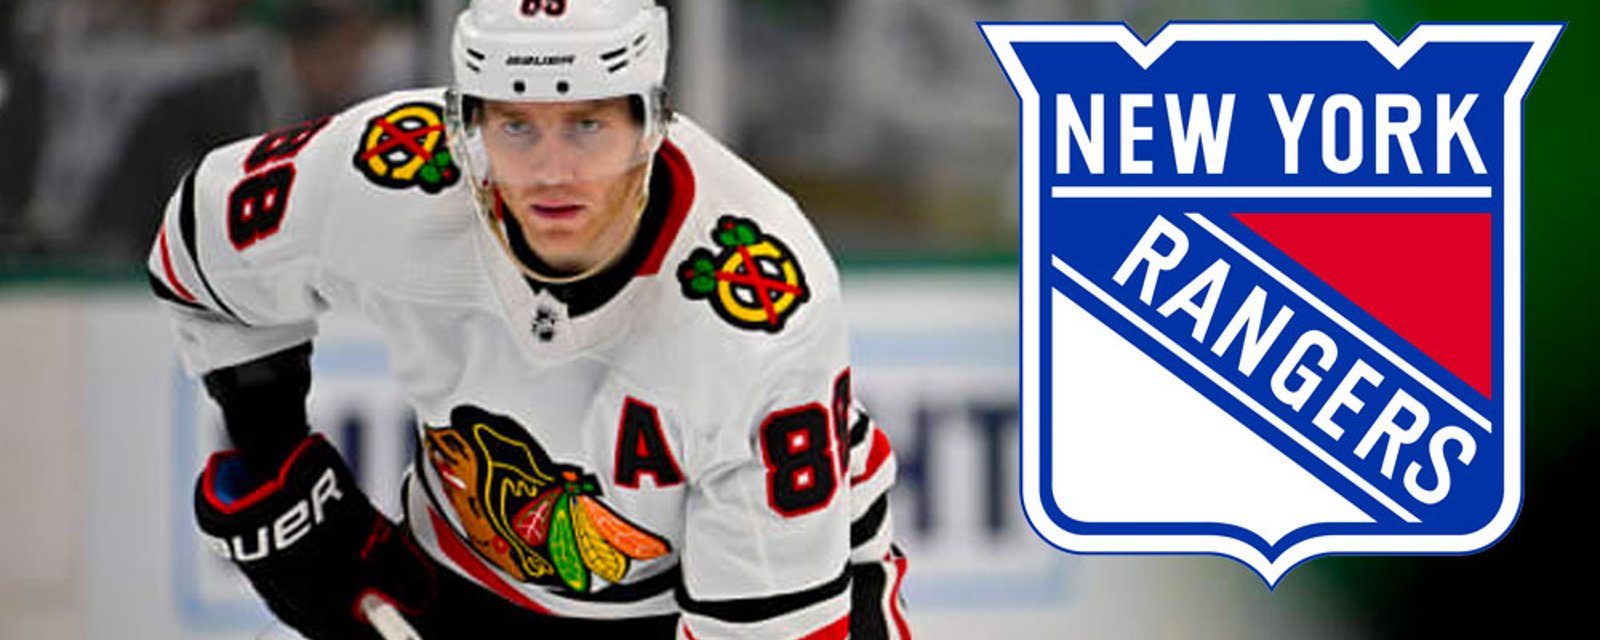 Reports that Patrick Kane is headed to Rangers tomorrow